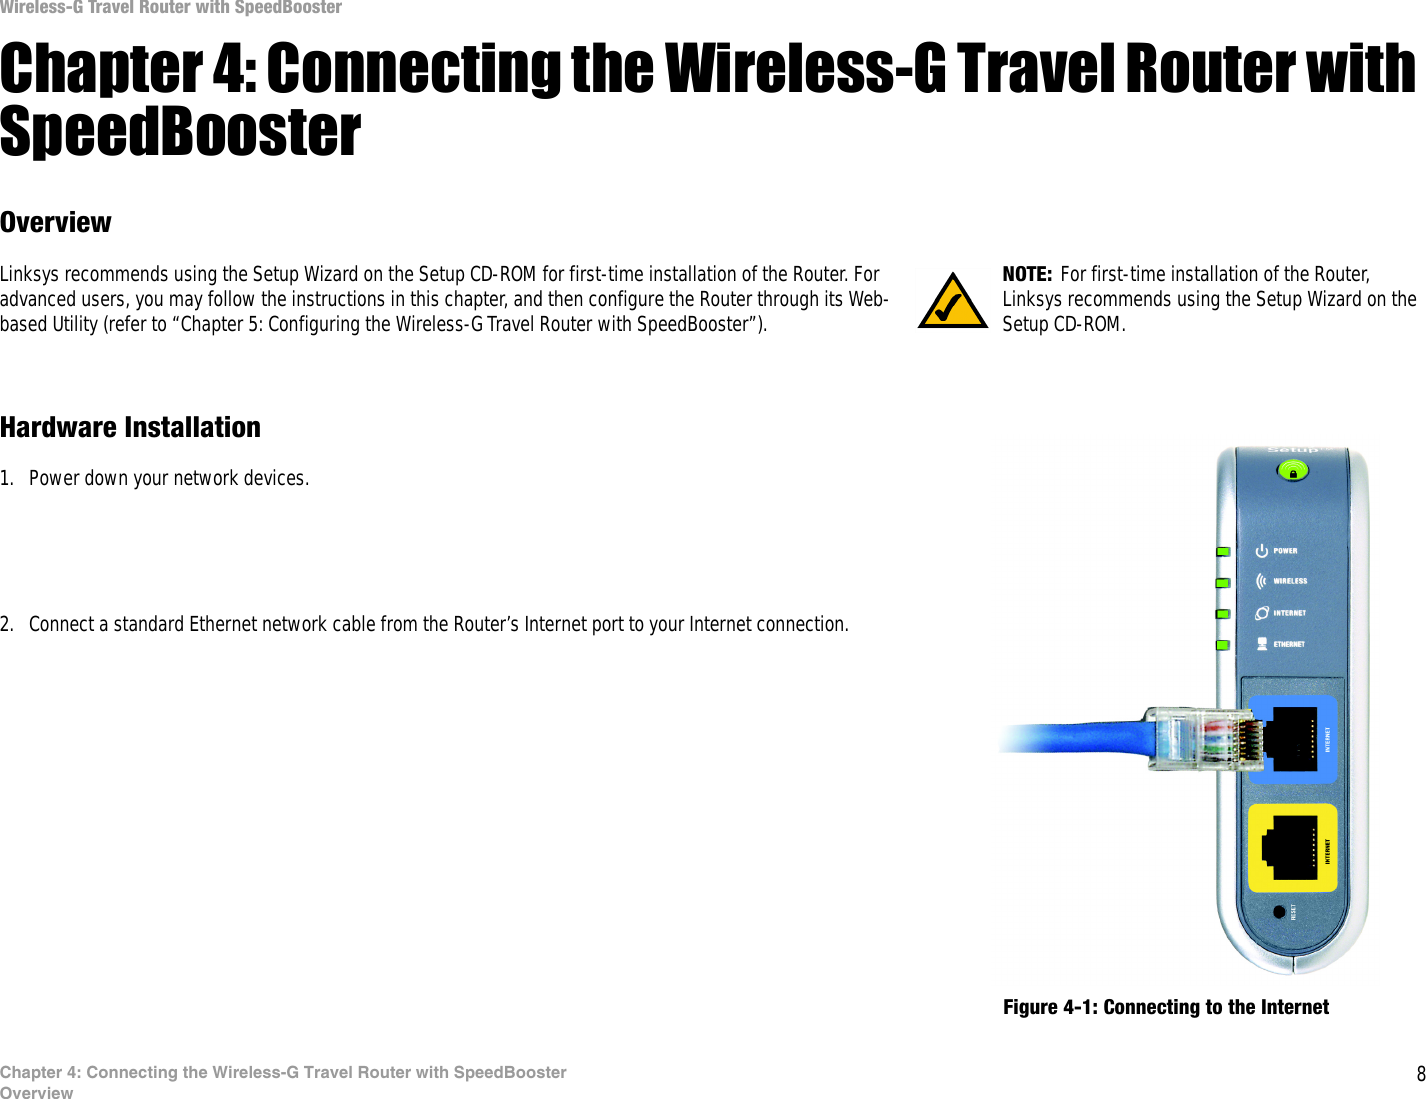 8Chapter 4: Connecting the Wireless-G Travel Router with SpeedBoosterOverviewWireless-G Travel Router with SpeedBoosterChapter 4: Connecting the Wireless-G Travel Router with SpeedBoosterOverviewLinksys recommends using the Setup Wizard on the Setup CD-ROM for first-time installation of the Router. For advanced users, you may follow the instructions in this chapter, and then configure the Router through its Web-based Utility (refer to “Chapter 5: Configuring the Wireless-G Travel Router with SpeedBooster”).Hardware Installation1. Power down your network devices.2. Connect a standard Ethernet network cable from the Router’s Internet port to your Internet connection.Figure 4-1: Connecting to the InternetNOTE: For first-time installation of the Router, Linksys recommends using the Setup Wizard on the Setup CD-ROM.